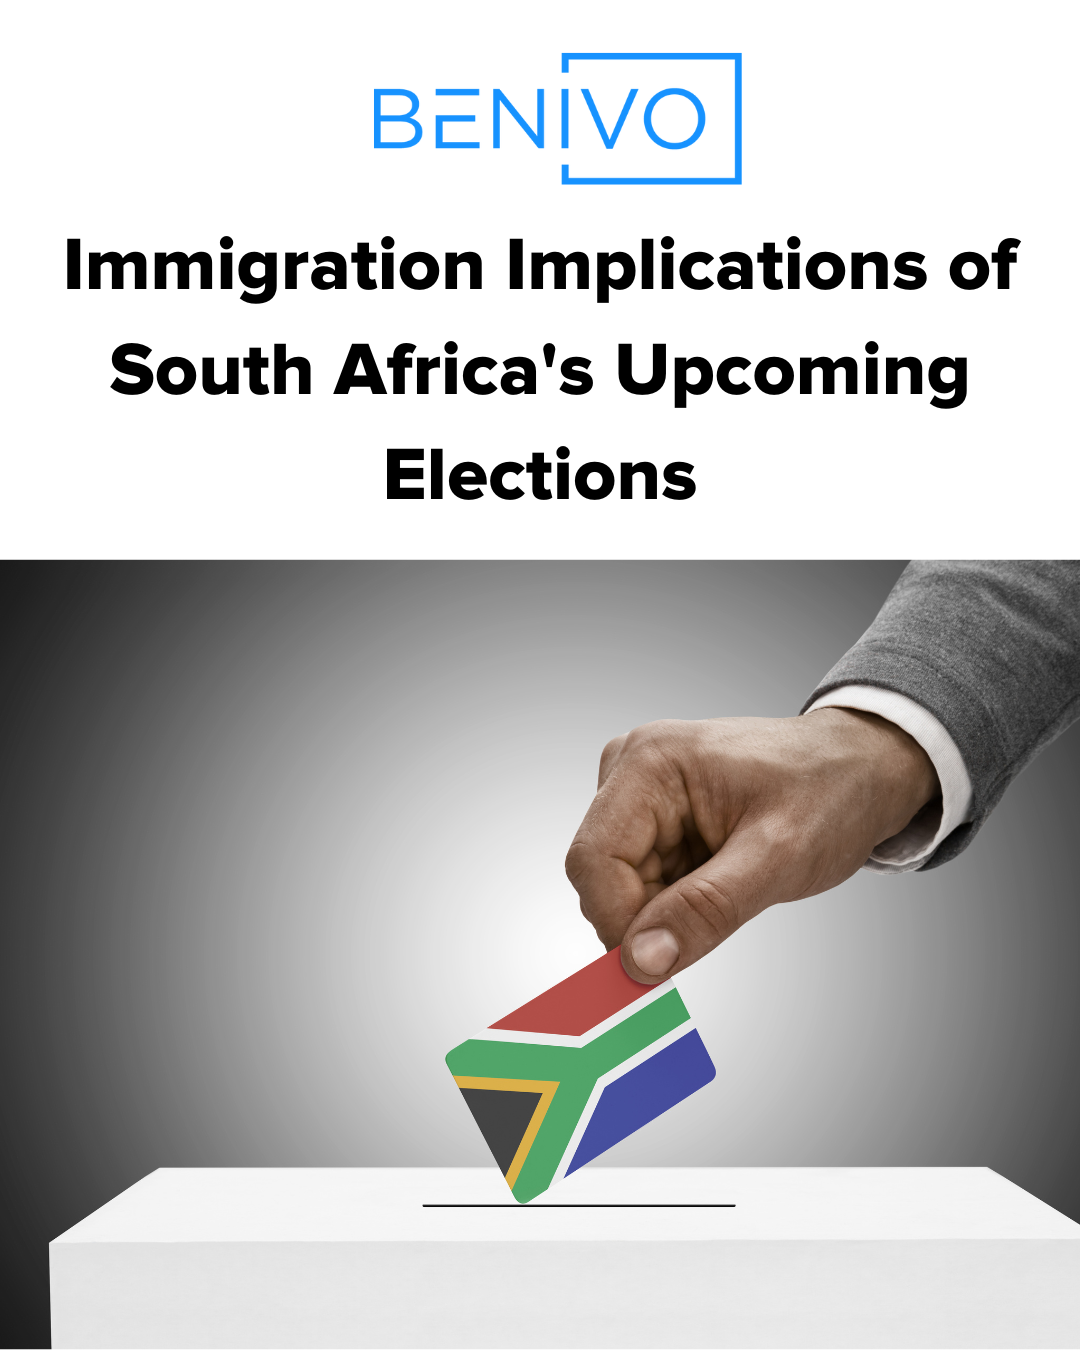 Immigration Implications of South Africa's Upcoming Elections